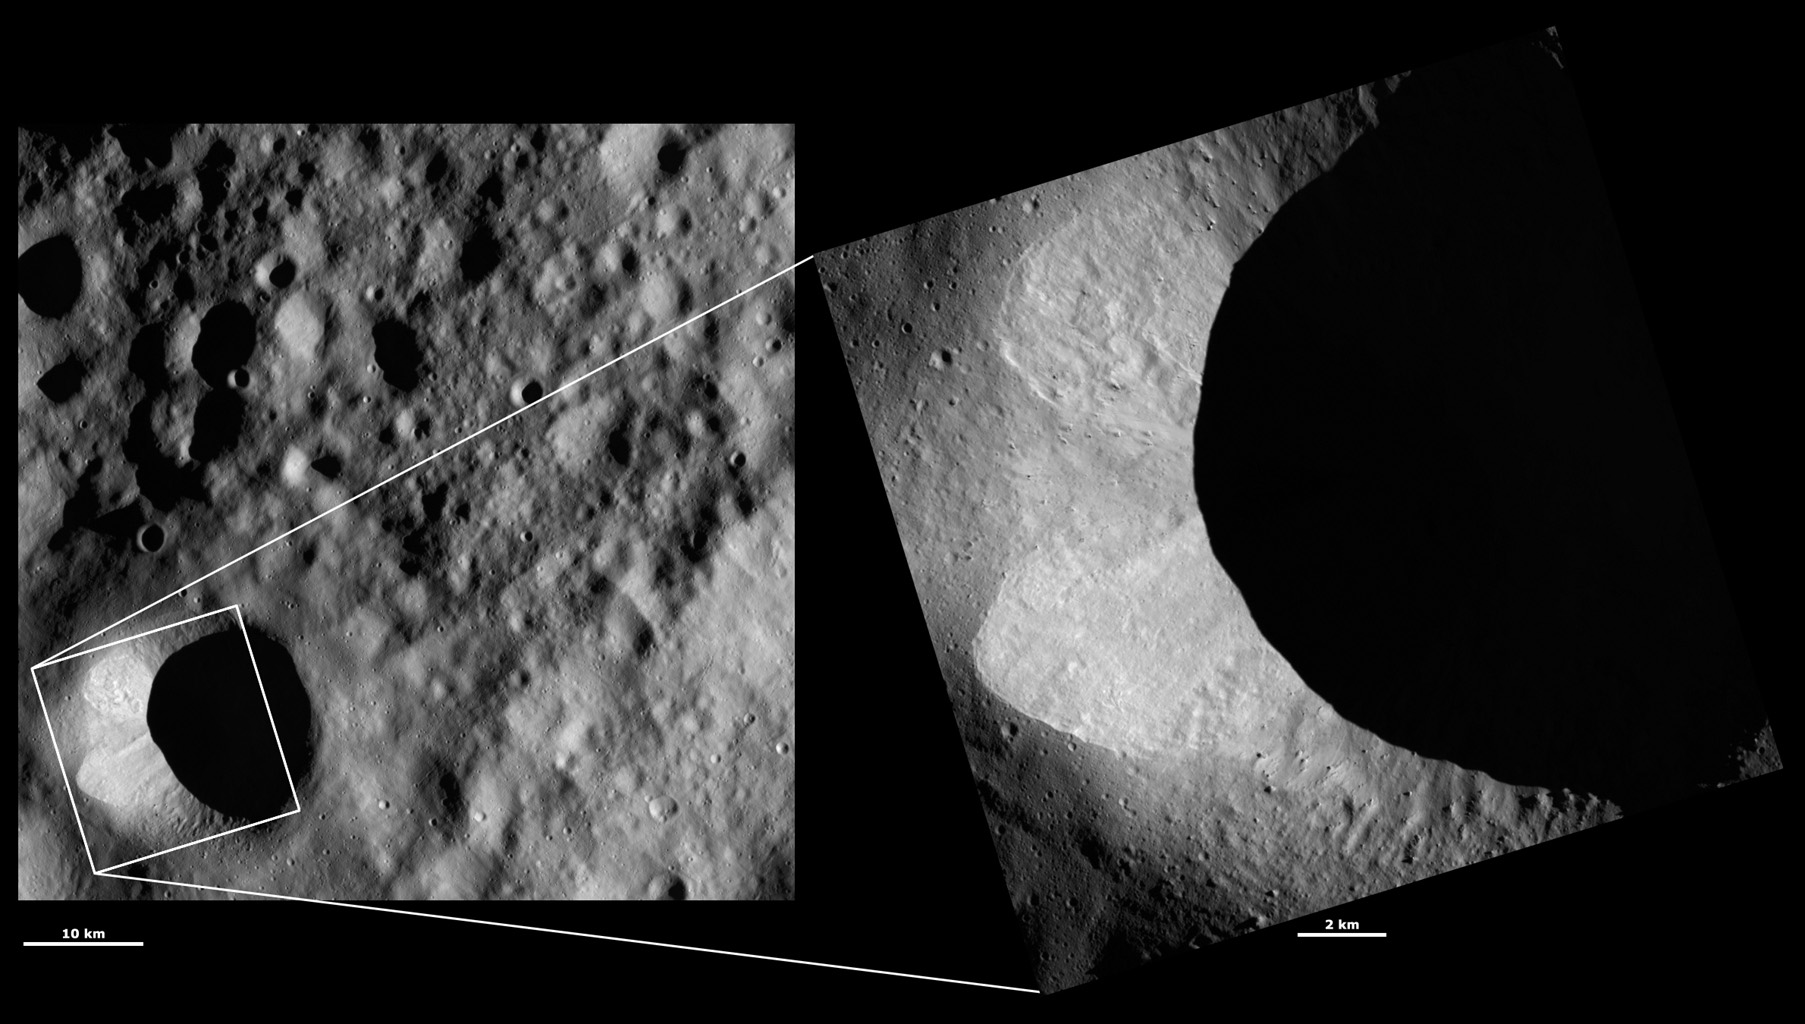 HAMO and LAMO Images of Scantia Crater